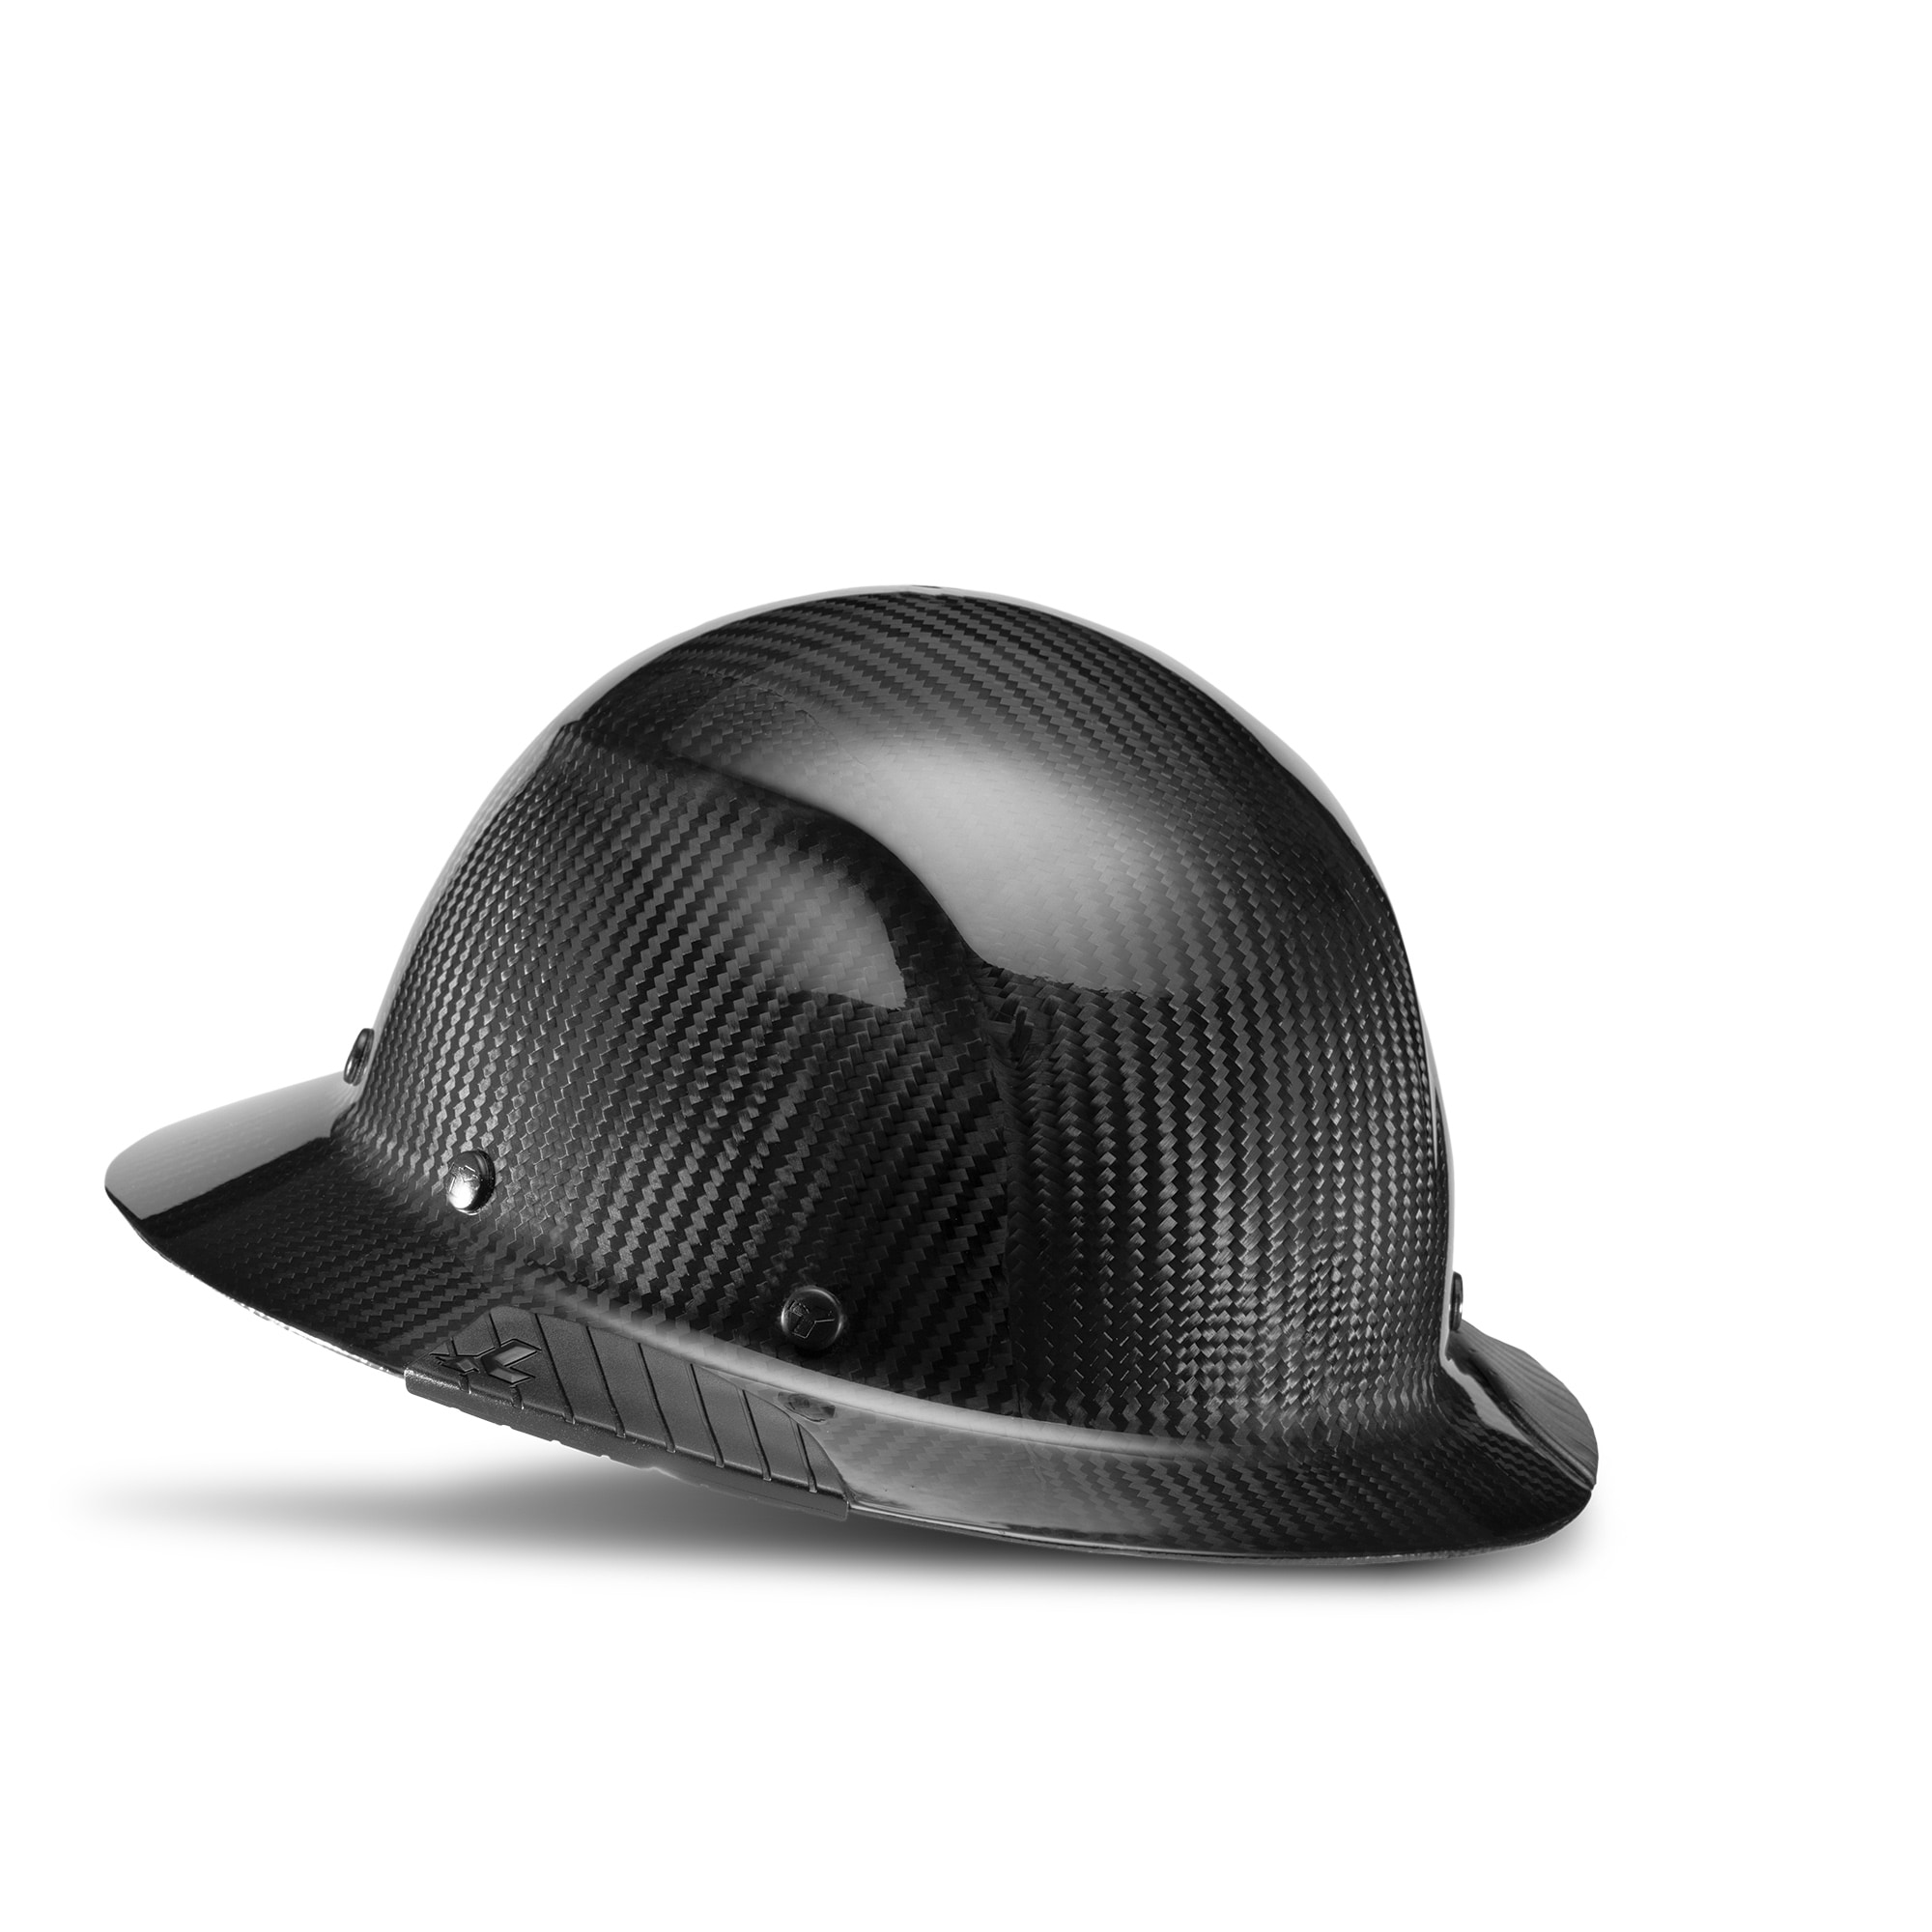 CORDOVA Safety Hard Hat Accessories, Type: Neck Shade, Hard Hat  Compatibility: Cap Style Hard Hats, Full Brim Hard Hats, Material:  Polyester Mesh